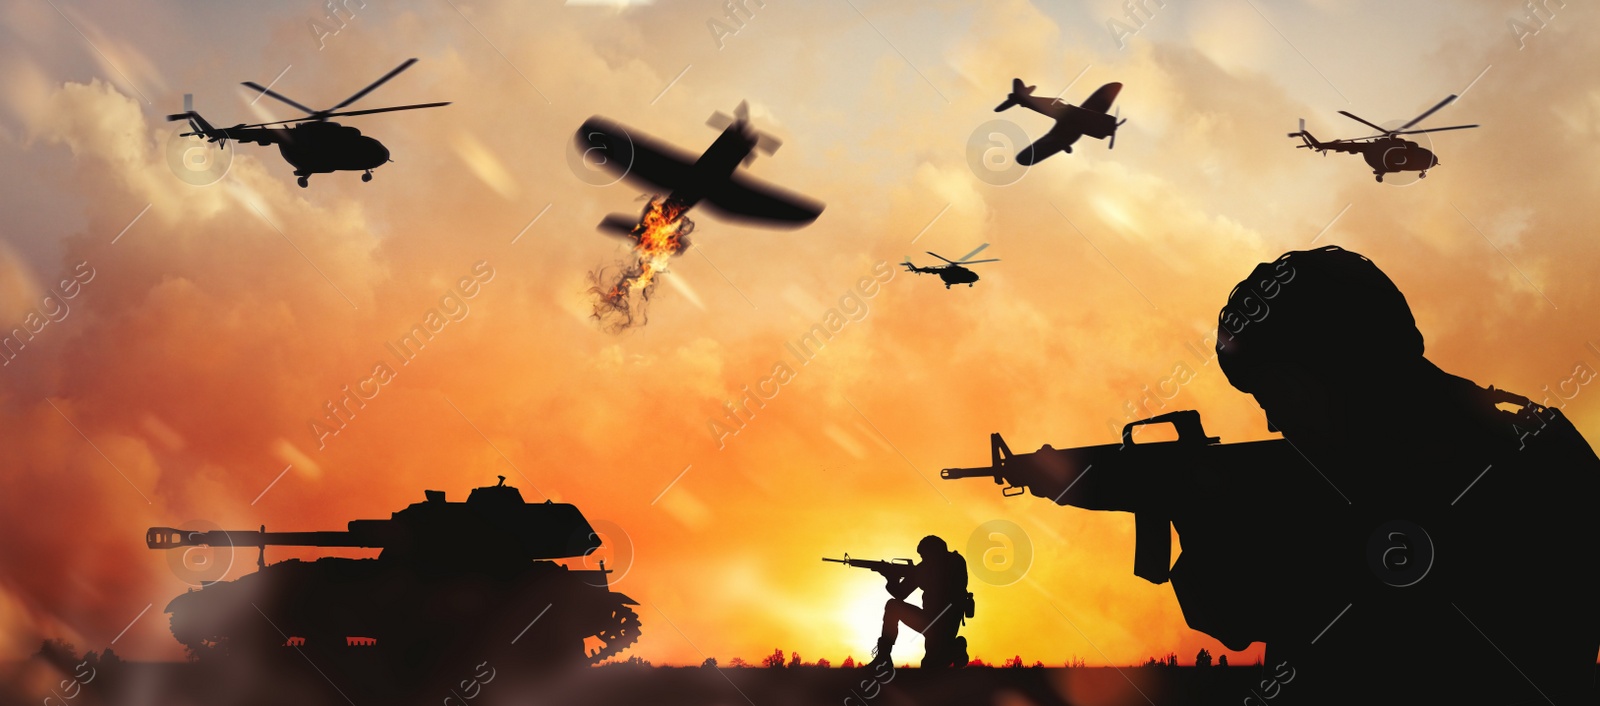 Image of Troops on battlefield at sunset. Military service